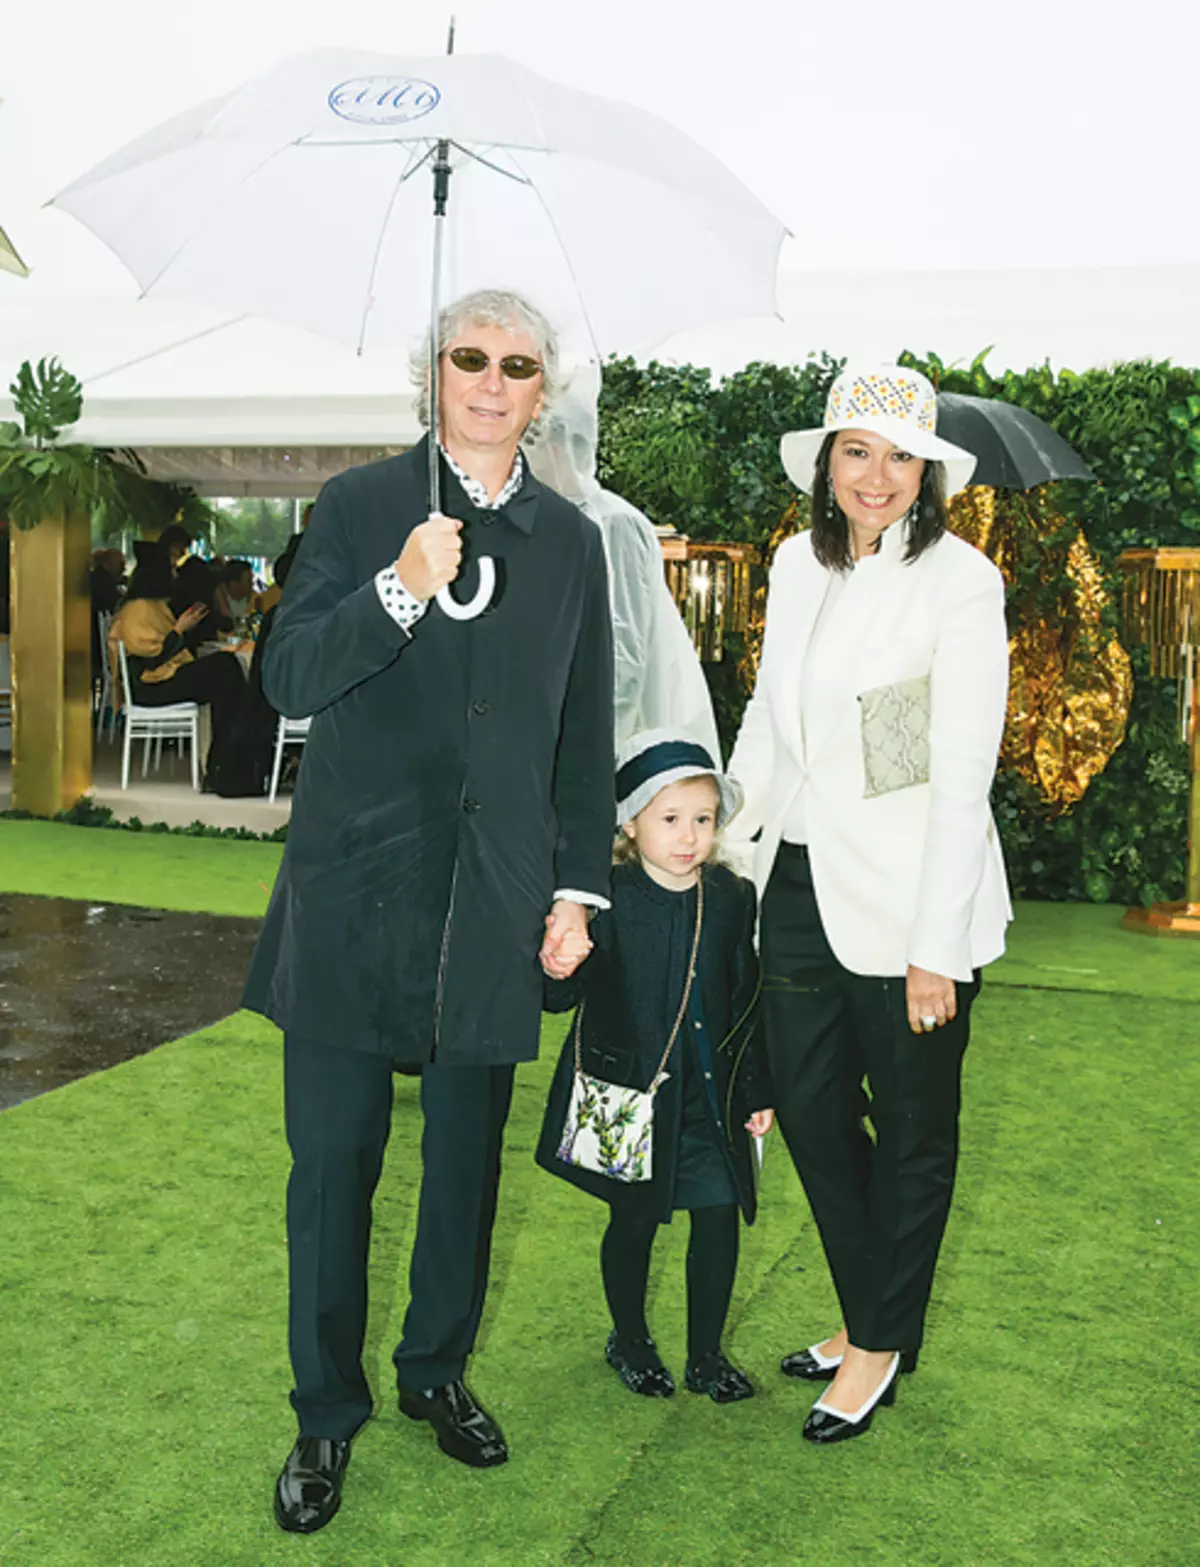 Arkady Ukupnik with his wife and daughter